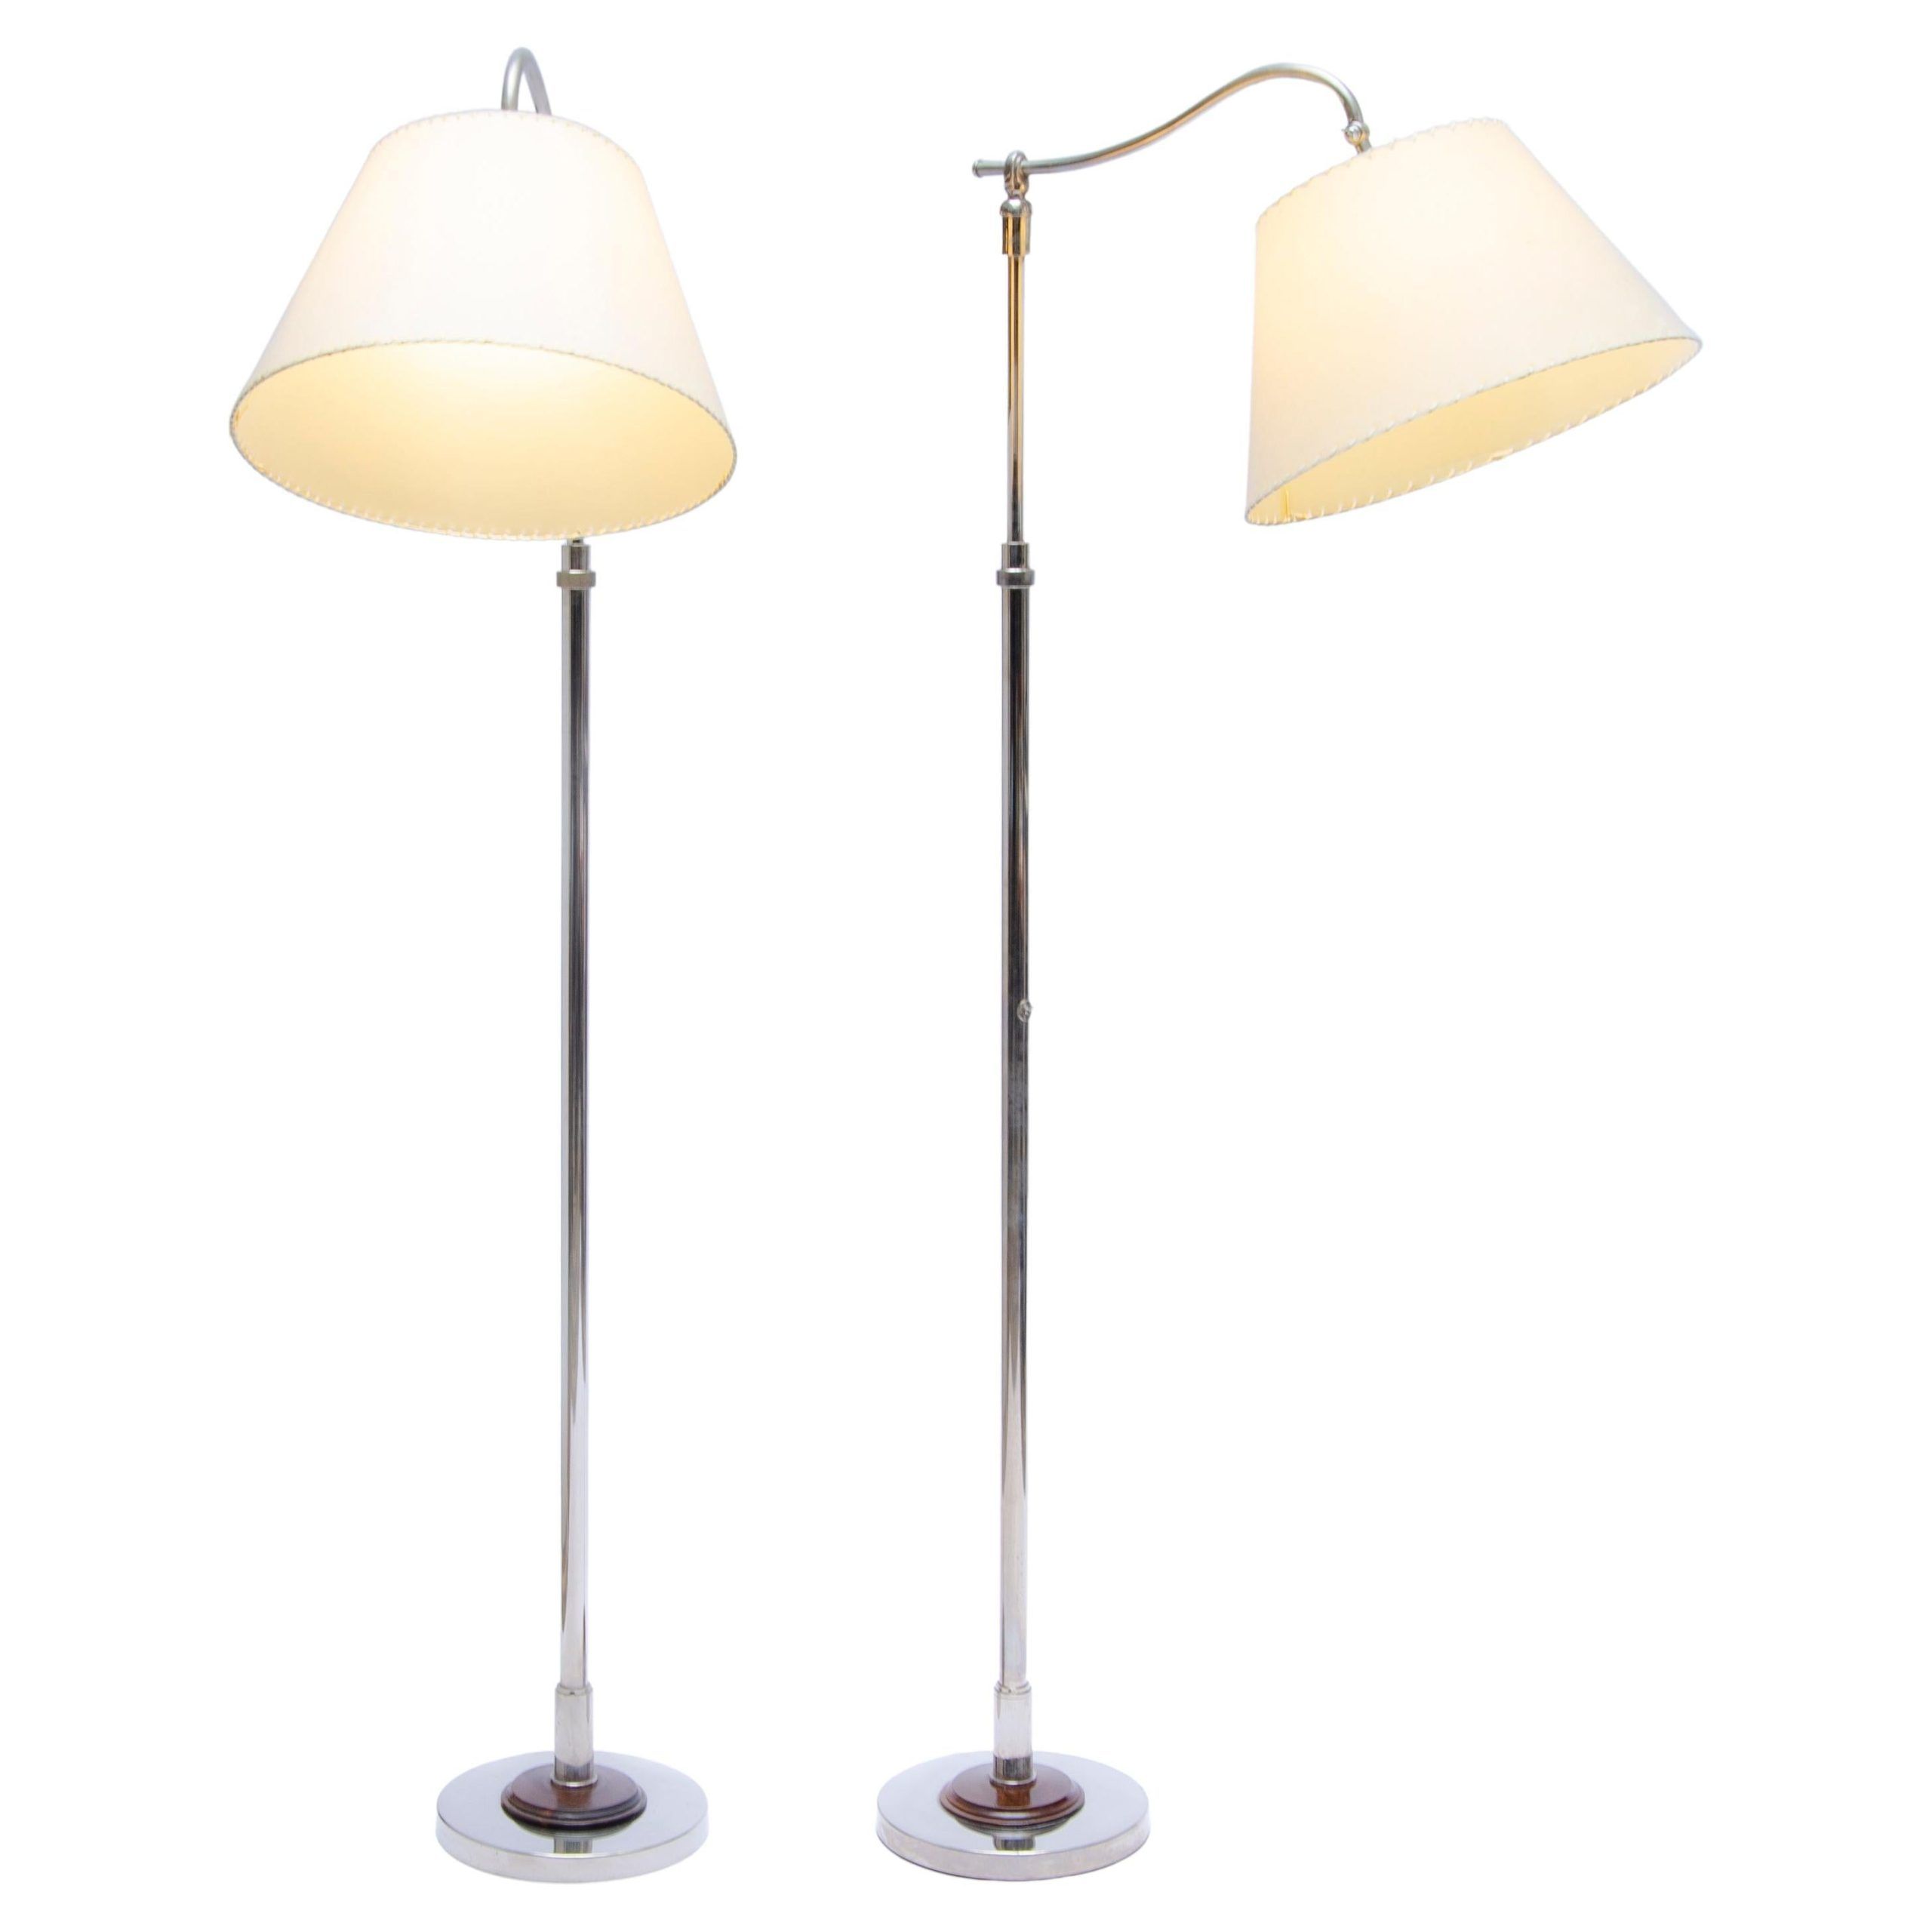 Widely Used Pair Of Standing Lamps With Adjustable Heightcomte For Sale At 1stdibs Regarding Adjustable Height Standing Lamps (View 4 of 10)